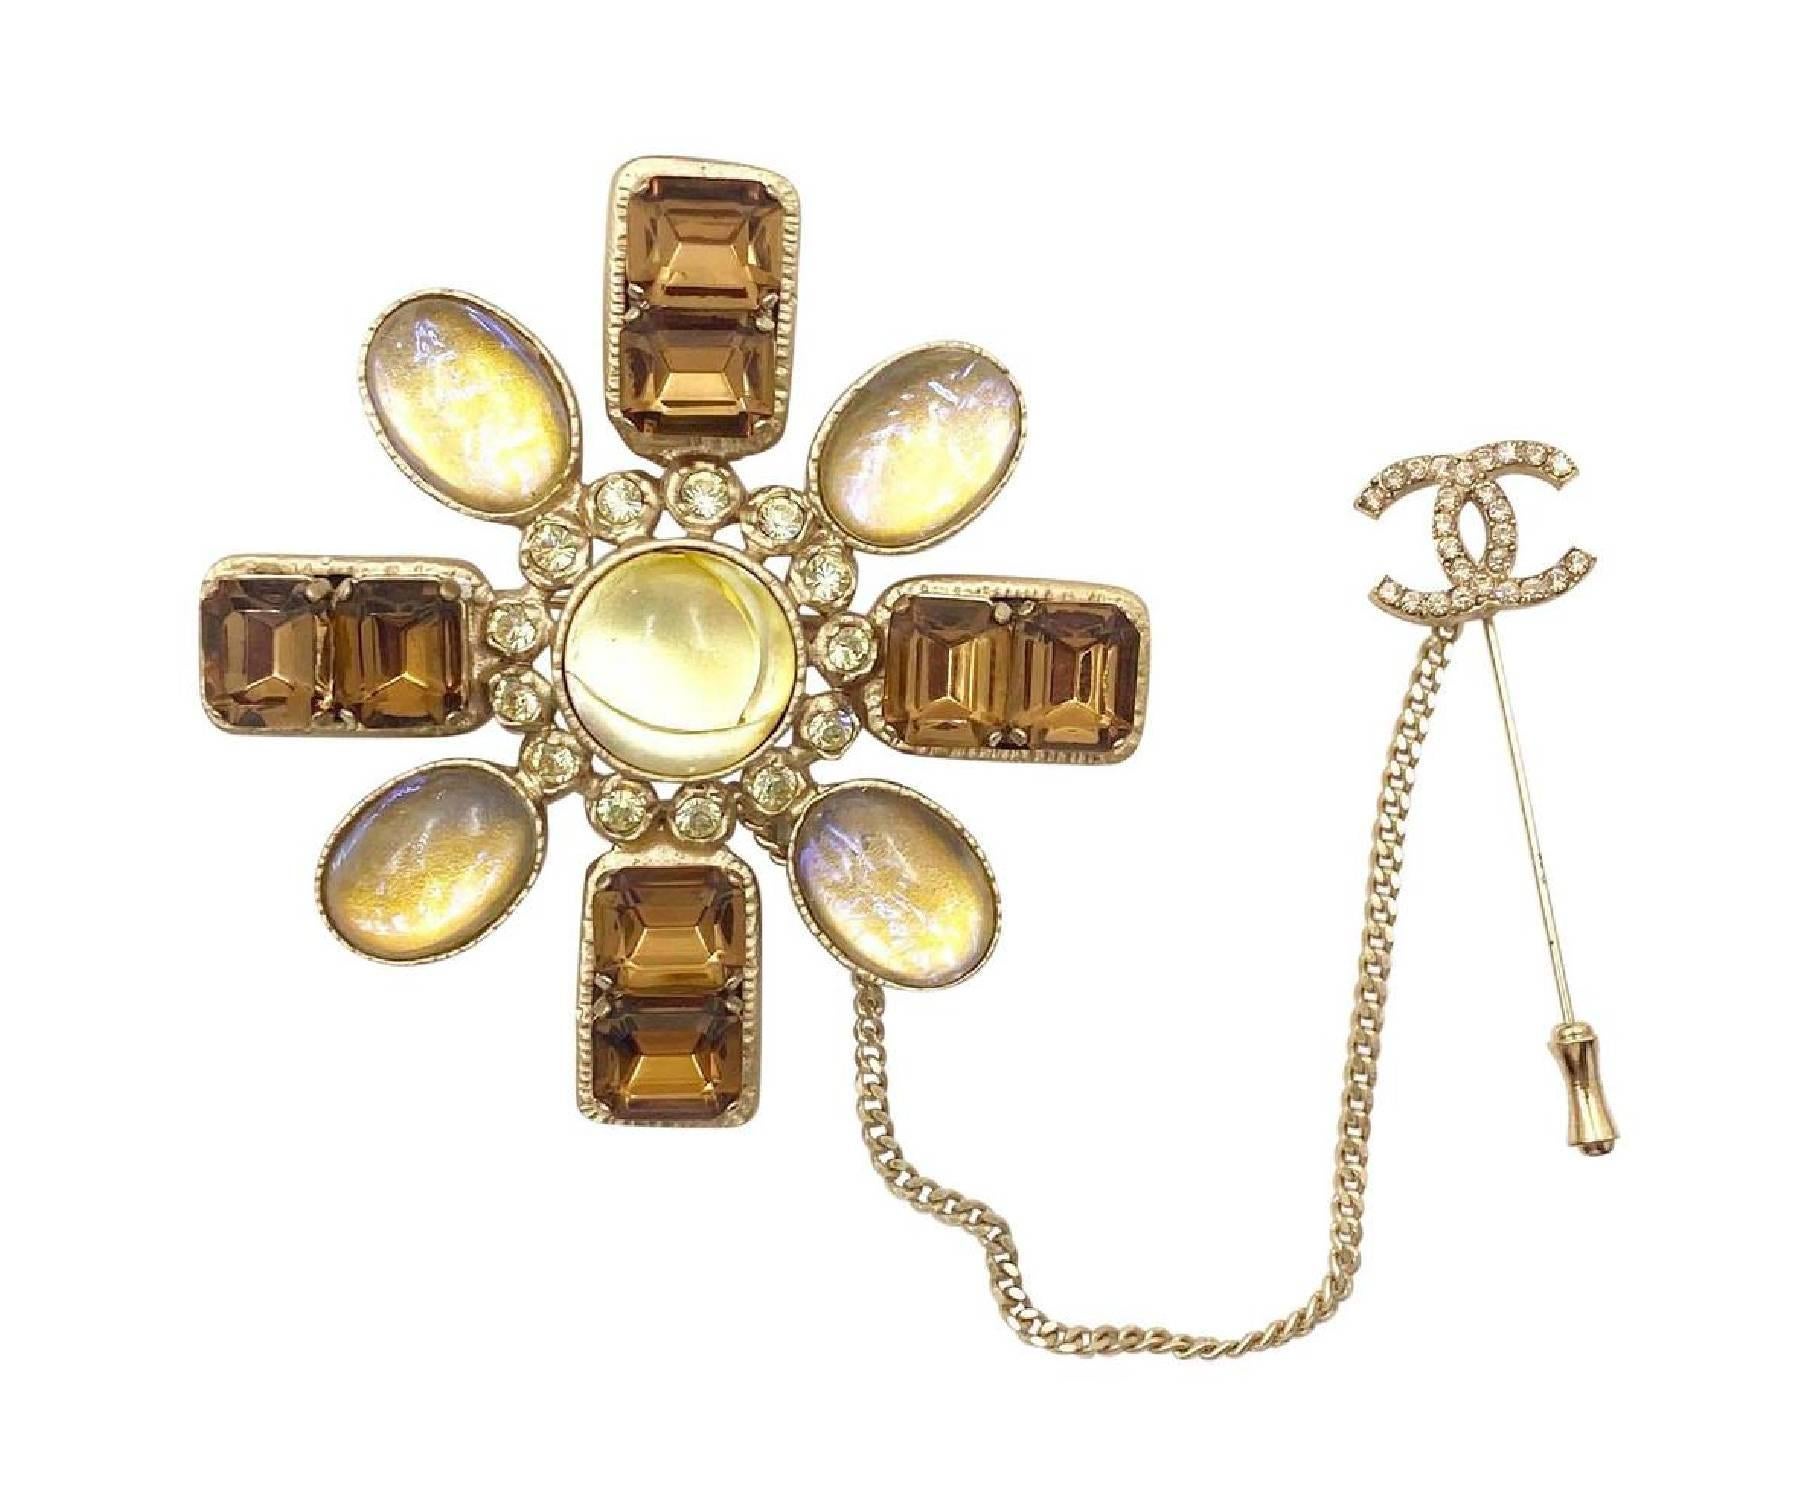 Chanel Gold CC Brown Yellow Bronze Stone Chain Pin Brooch

* Marked 02
* Made in France
* Comes with original box

-The brooch is approximately 3″ x 3″
-The pin is approximately 2.25″ x 3″
-The center stone has 2 cracks.

AB4052-00074

